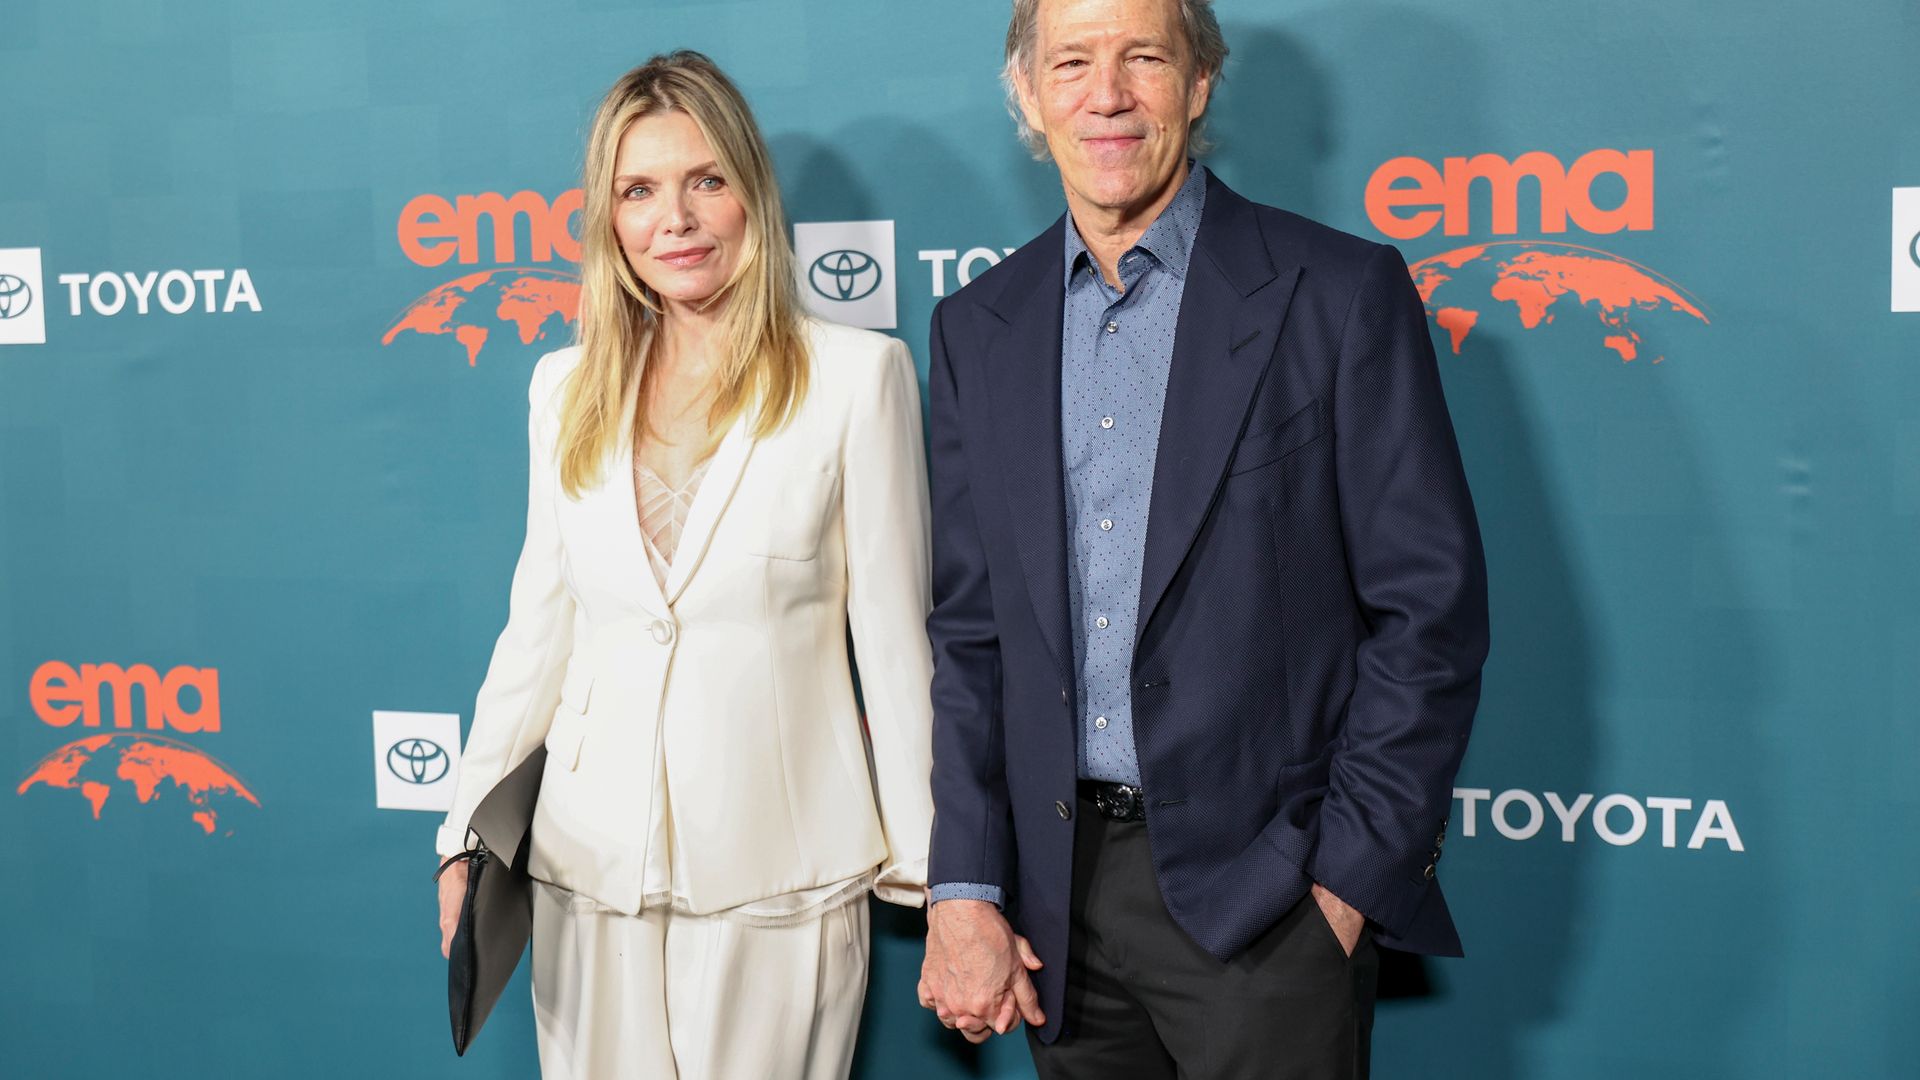 Michelle Pfeiffer makes rare red carpet appearance with husband David E. Kelley 